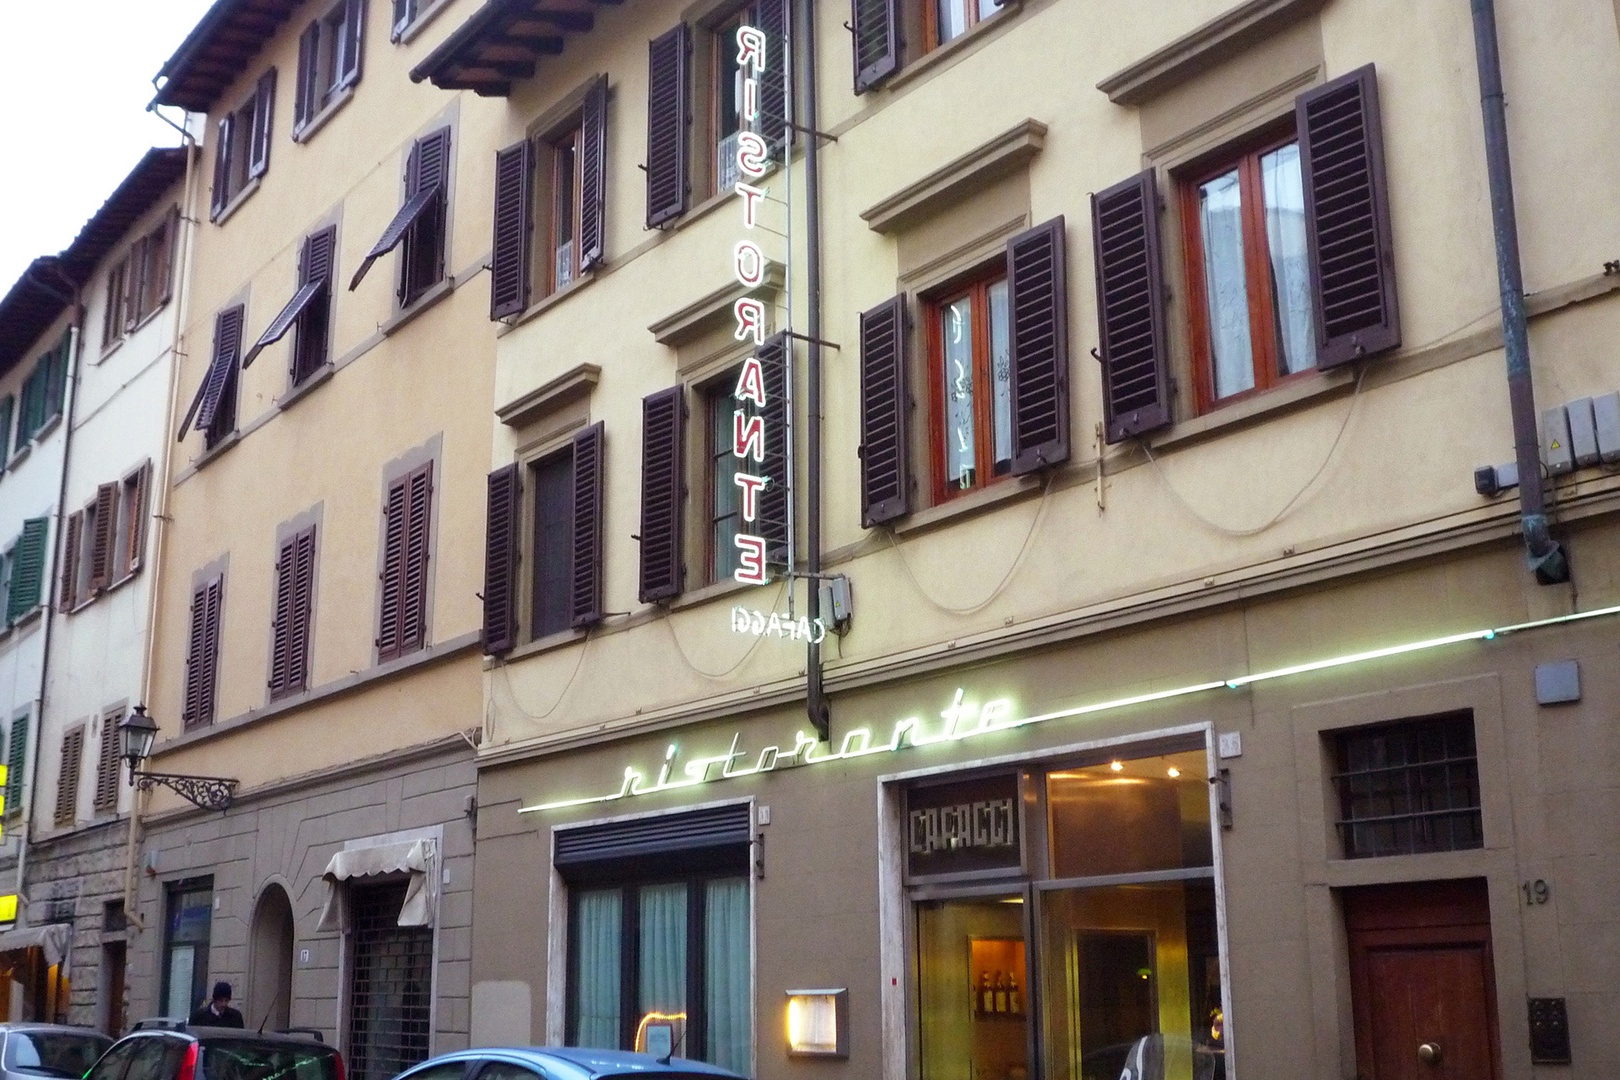 Down the block from the apartment is Ristorante Caffaggi, with Florentine specialties.